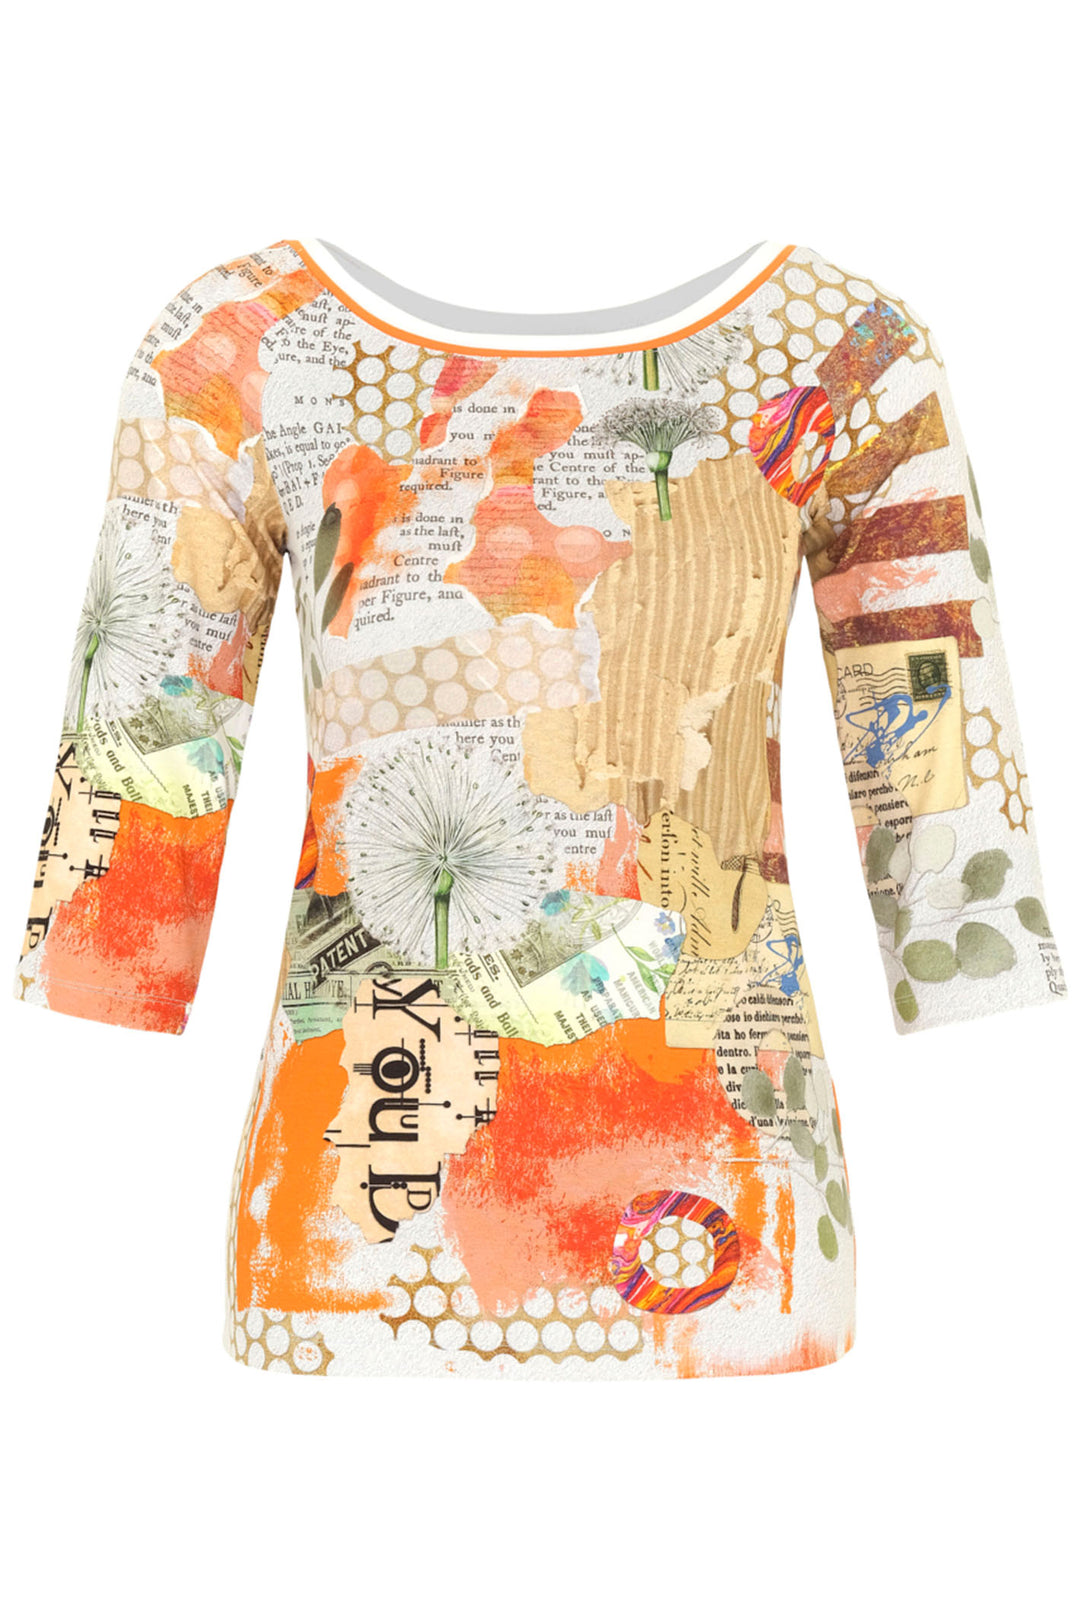 Dolcezza 24710 Orange Simply Art Gina Startup Big Changes Print Top - Shirley Allum Boutique